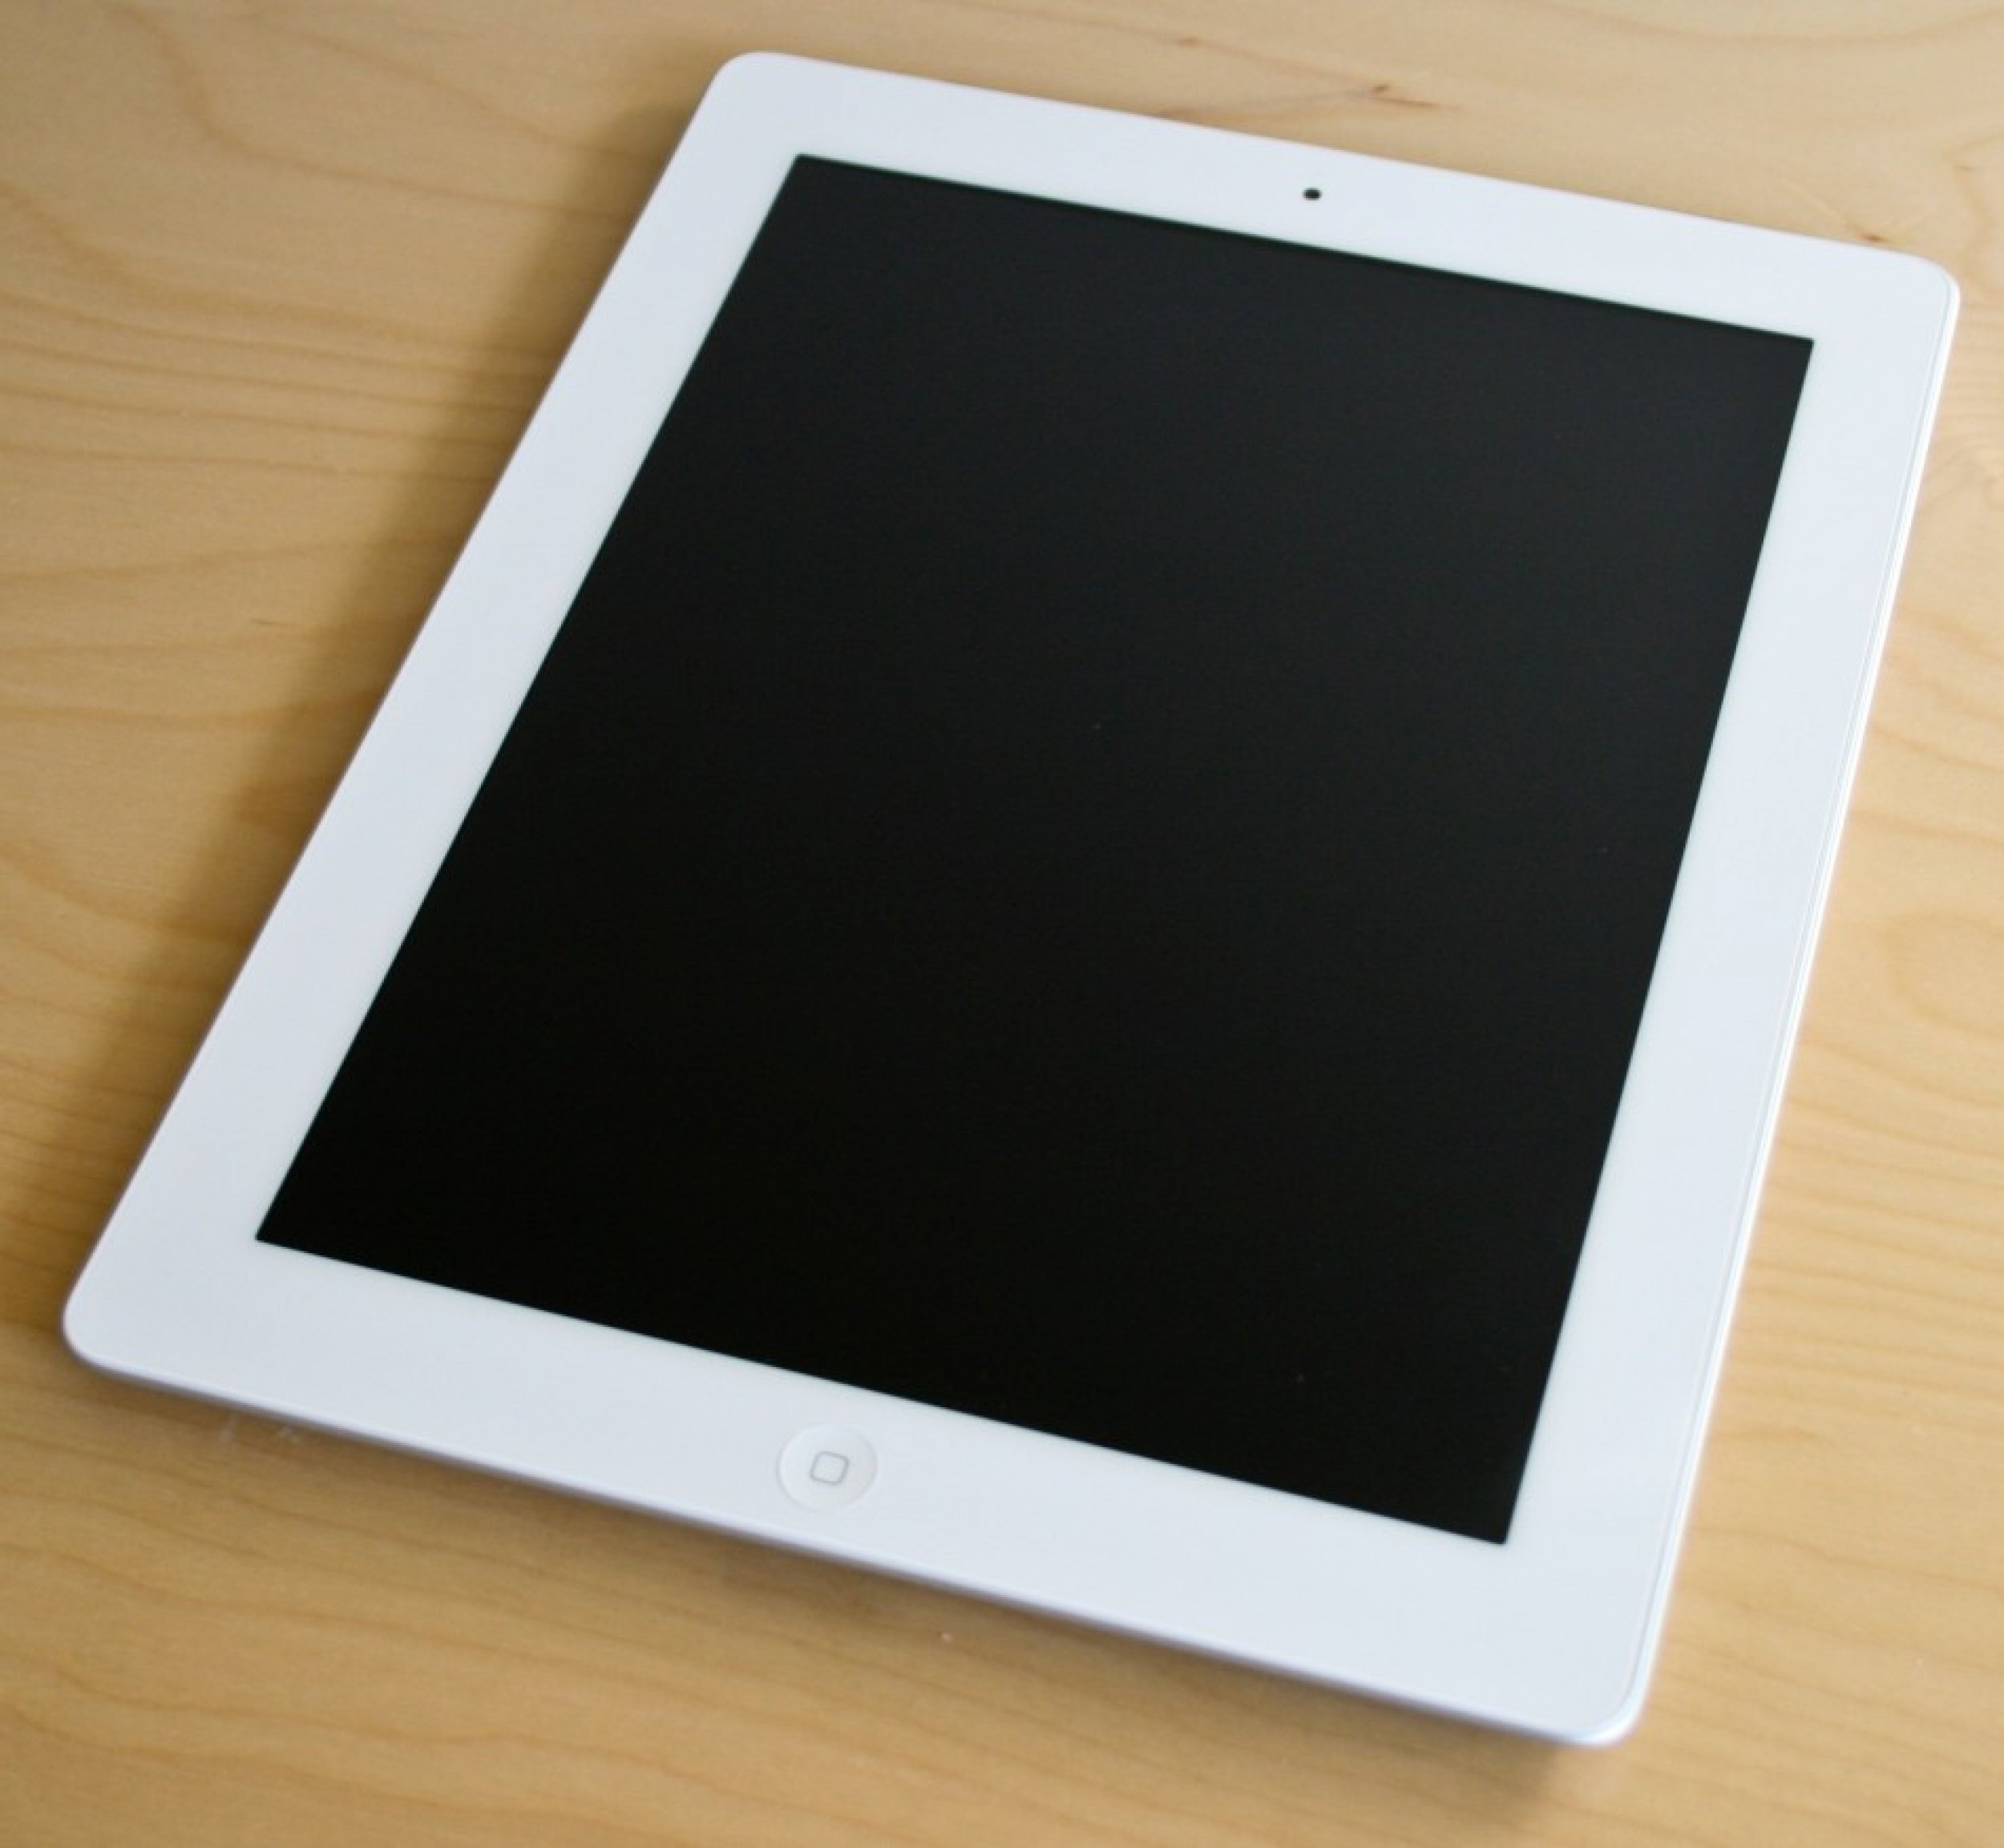 Apple will reportedly unveil the iPad 3 on March 7 in New York City. The lastest report comes from CNBCs Jon Fortt, who said on Tuesday that Apple will release a new iPad with a quad-core processor and 4G LTE capabilities. The price and launch info 